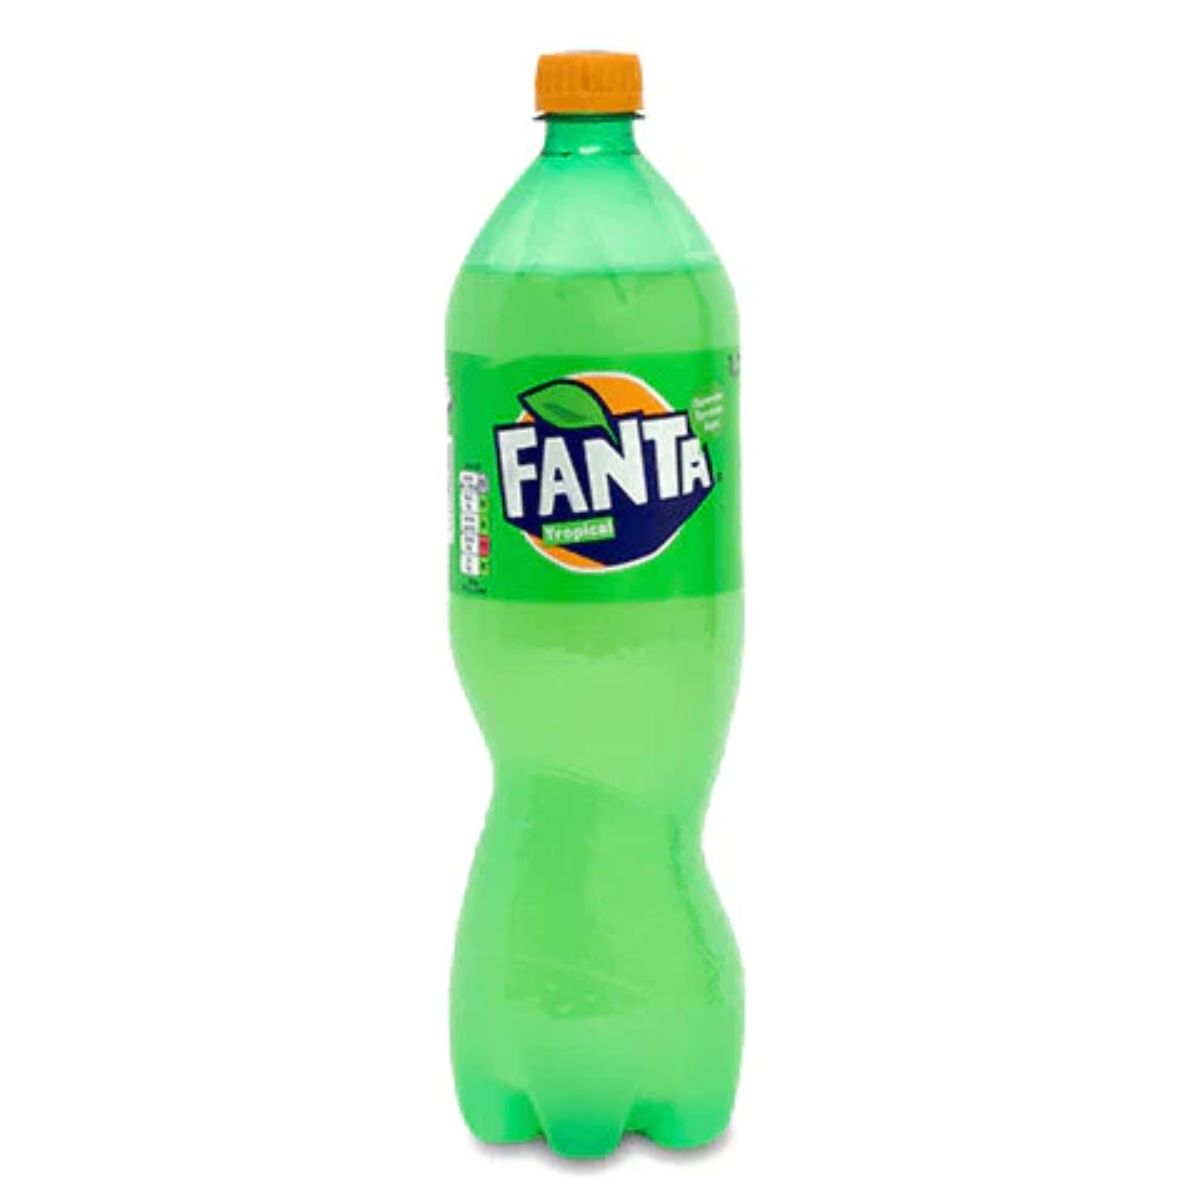 A bottle of Fanta - Tropical Green - 1.5L soda with a green label and liquid.